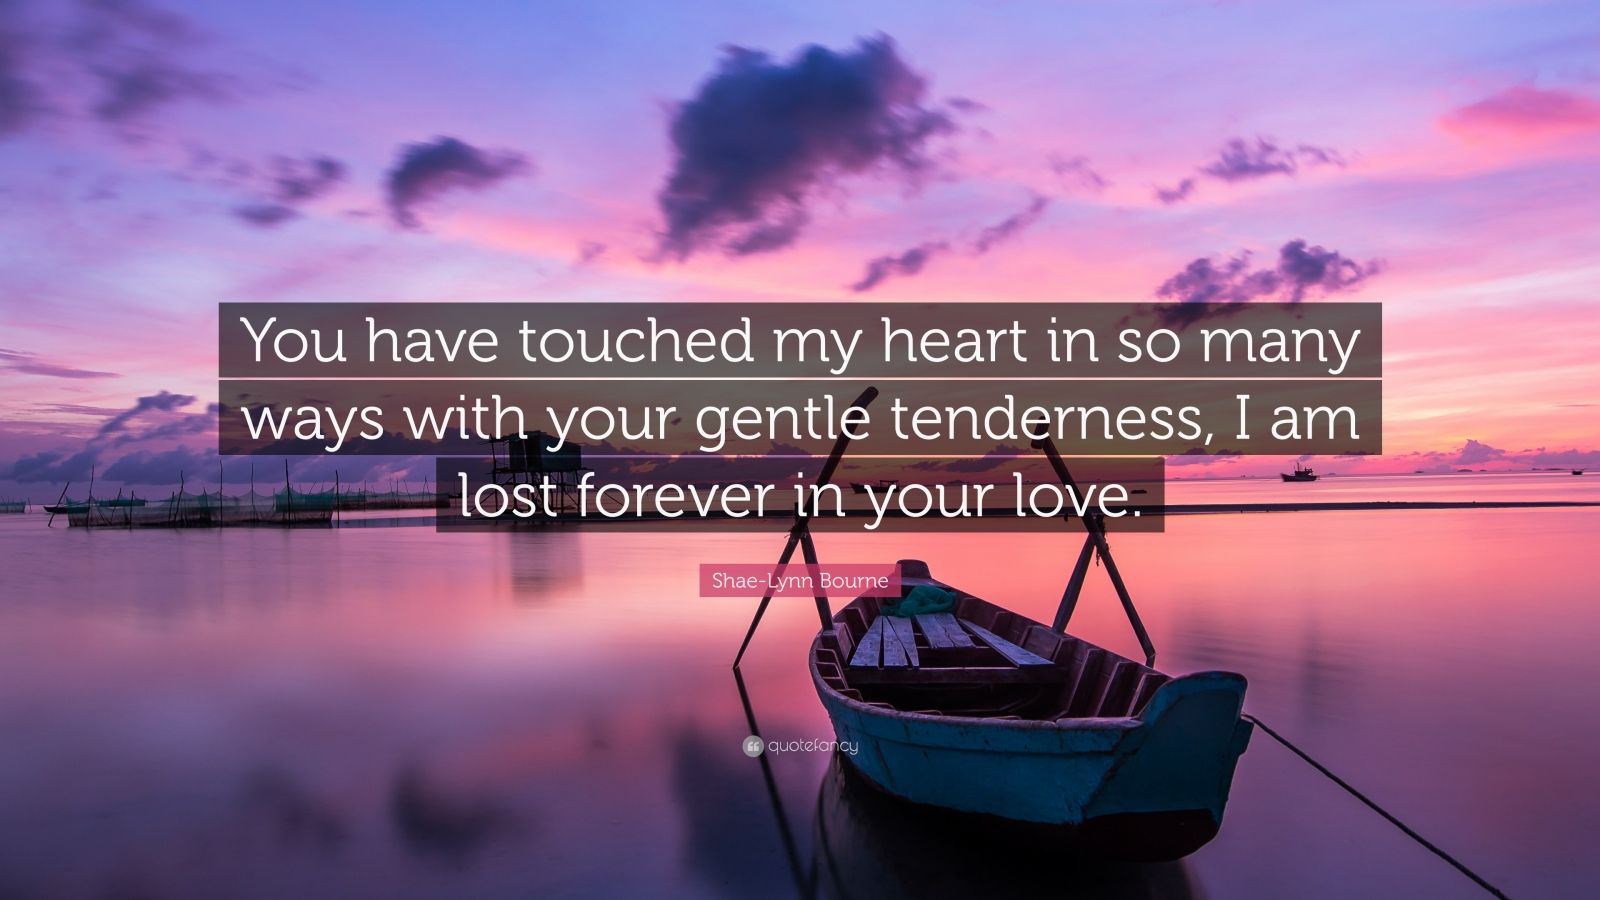 Shae-Lynn Bourne Quote: “You have touched my heart in so many ways with ...